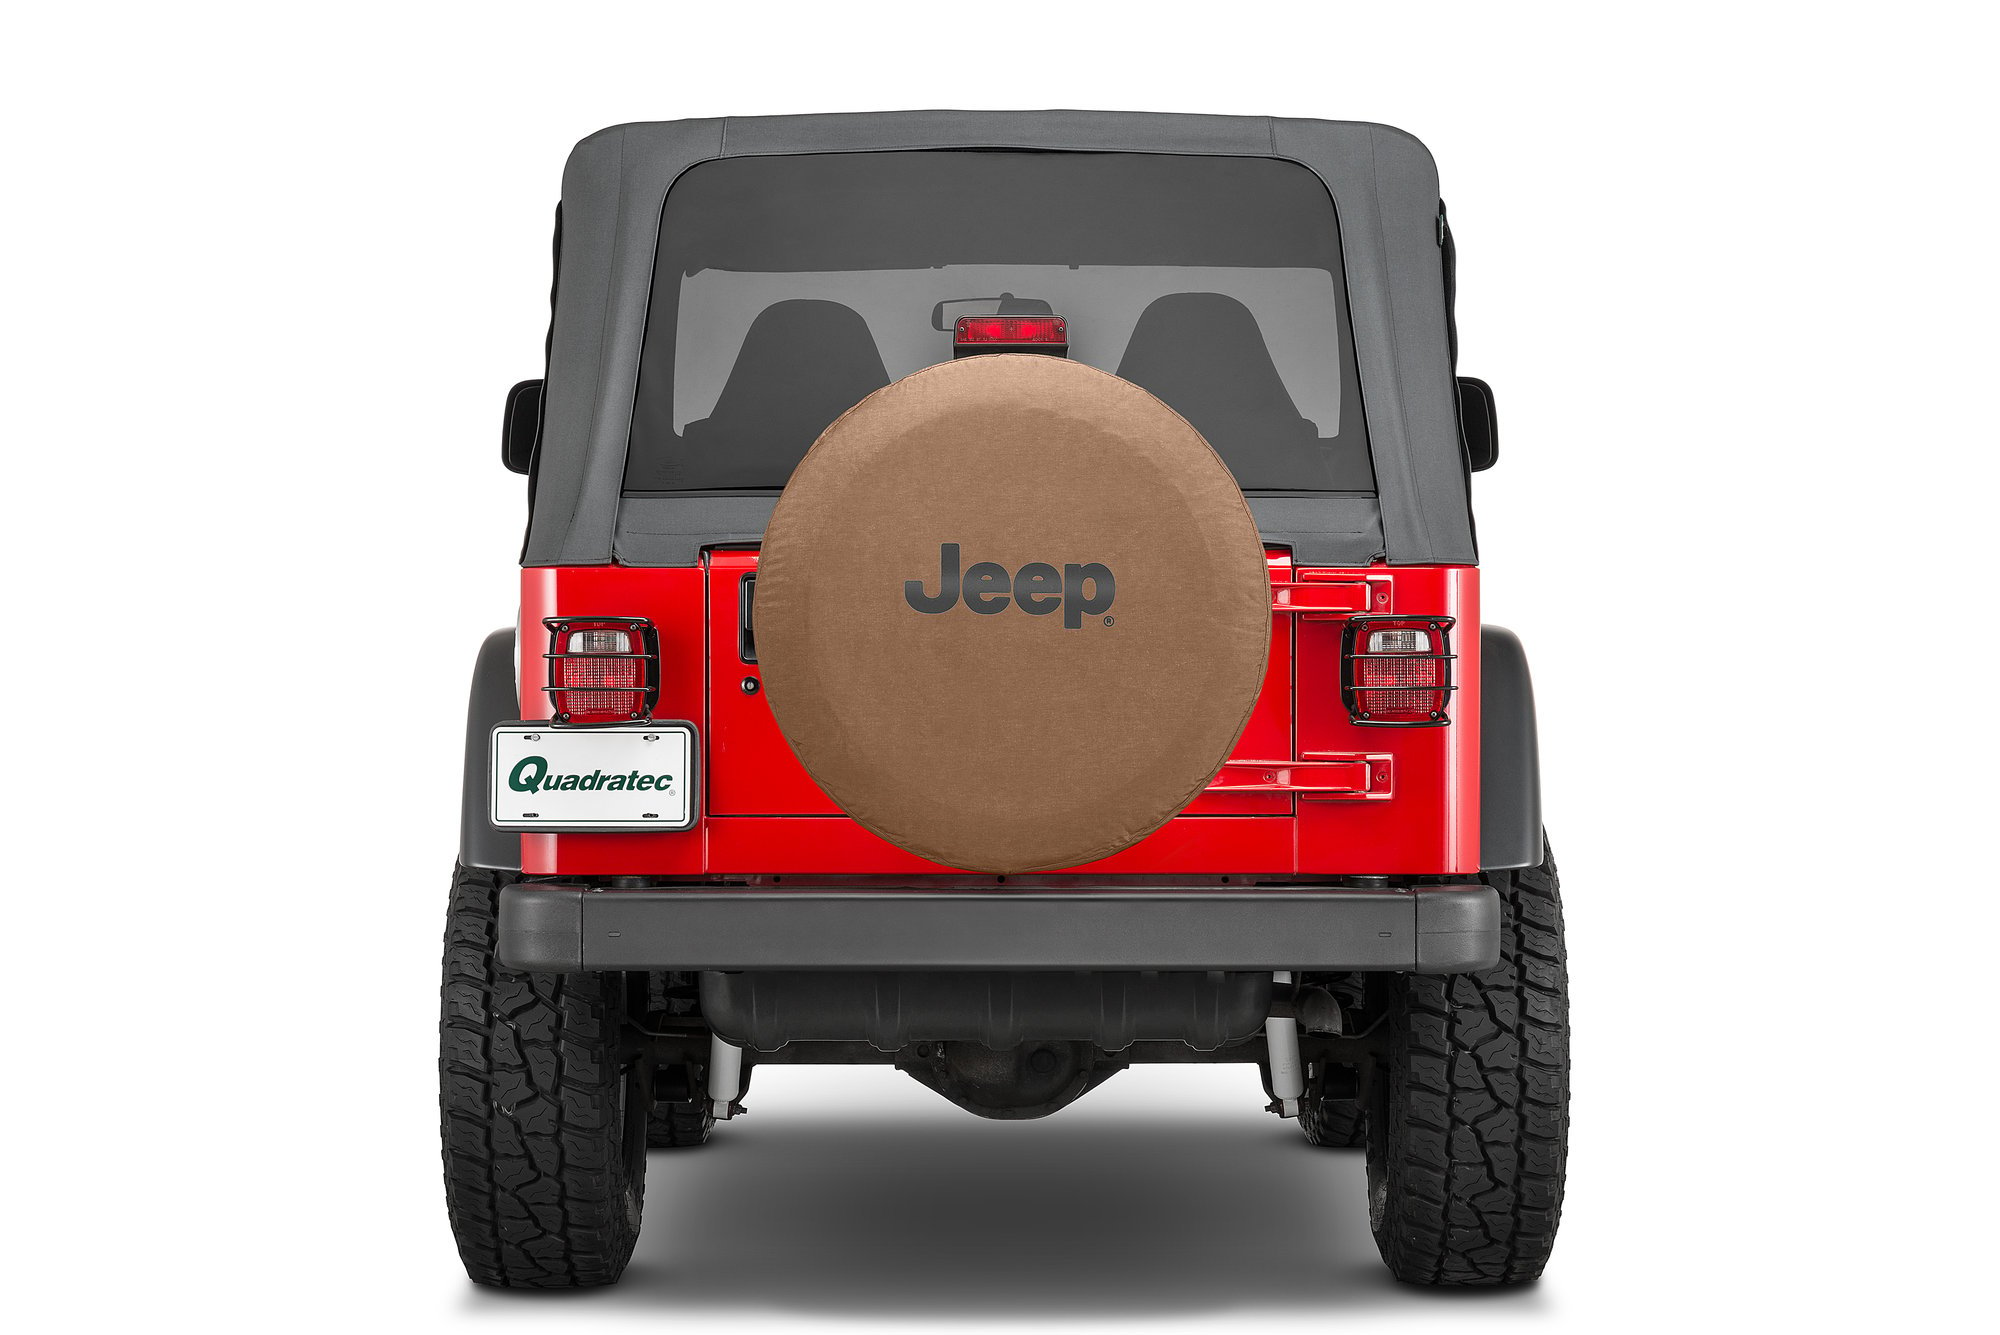 Mopar 82203734AB Jeep Logo Tire Cover in Spice Denim with Black Jeep Logo  Fits P225/75R15 and P215/75R16 tires | Quadratec